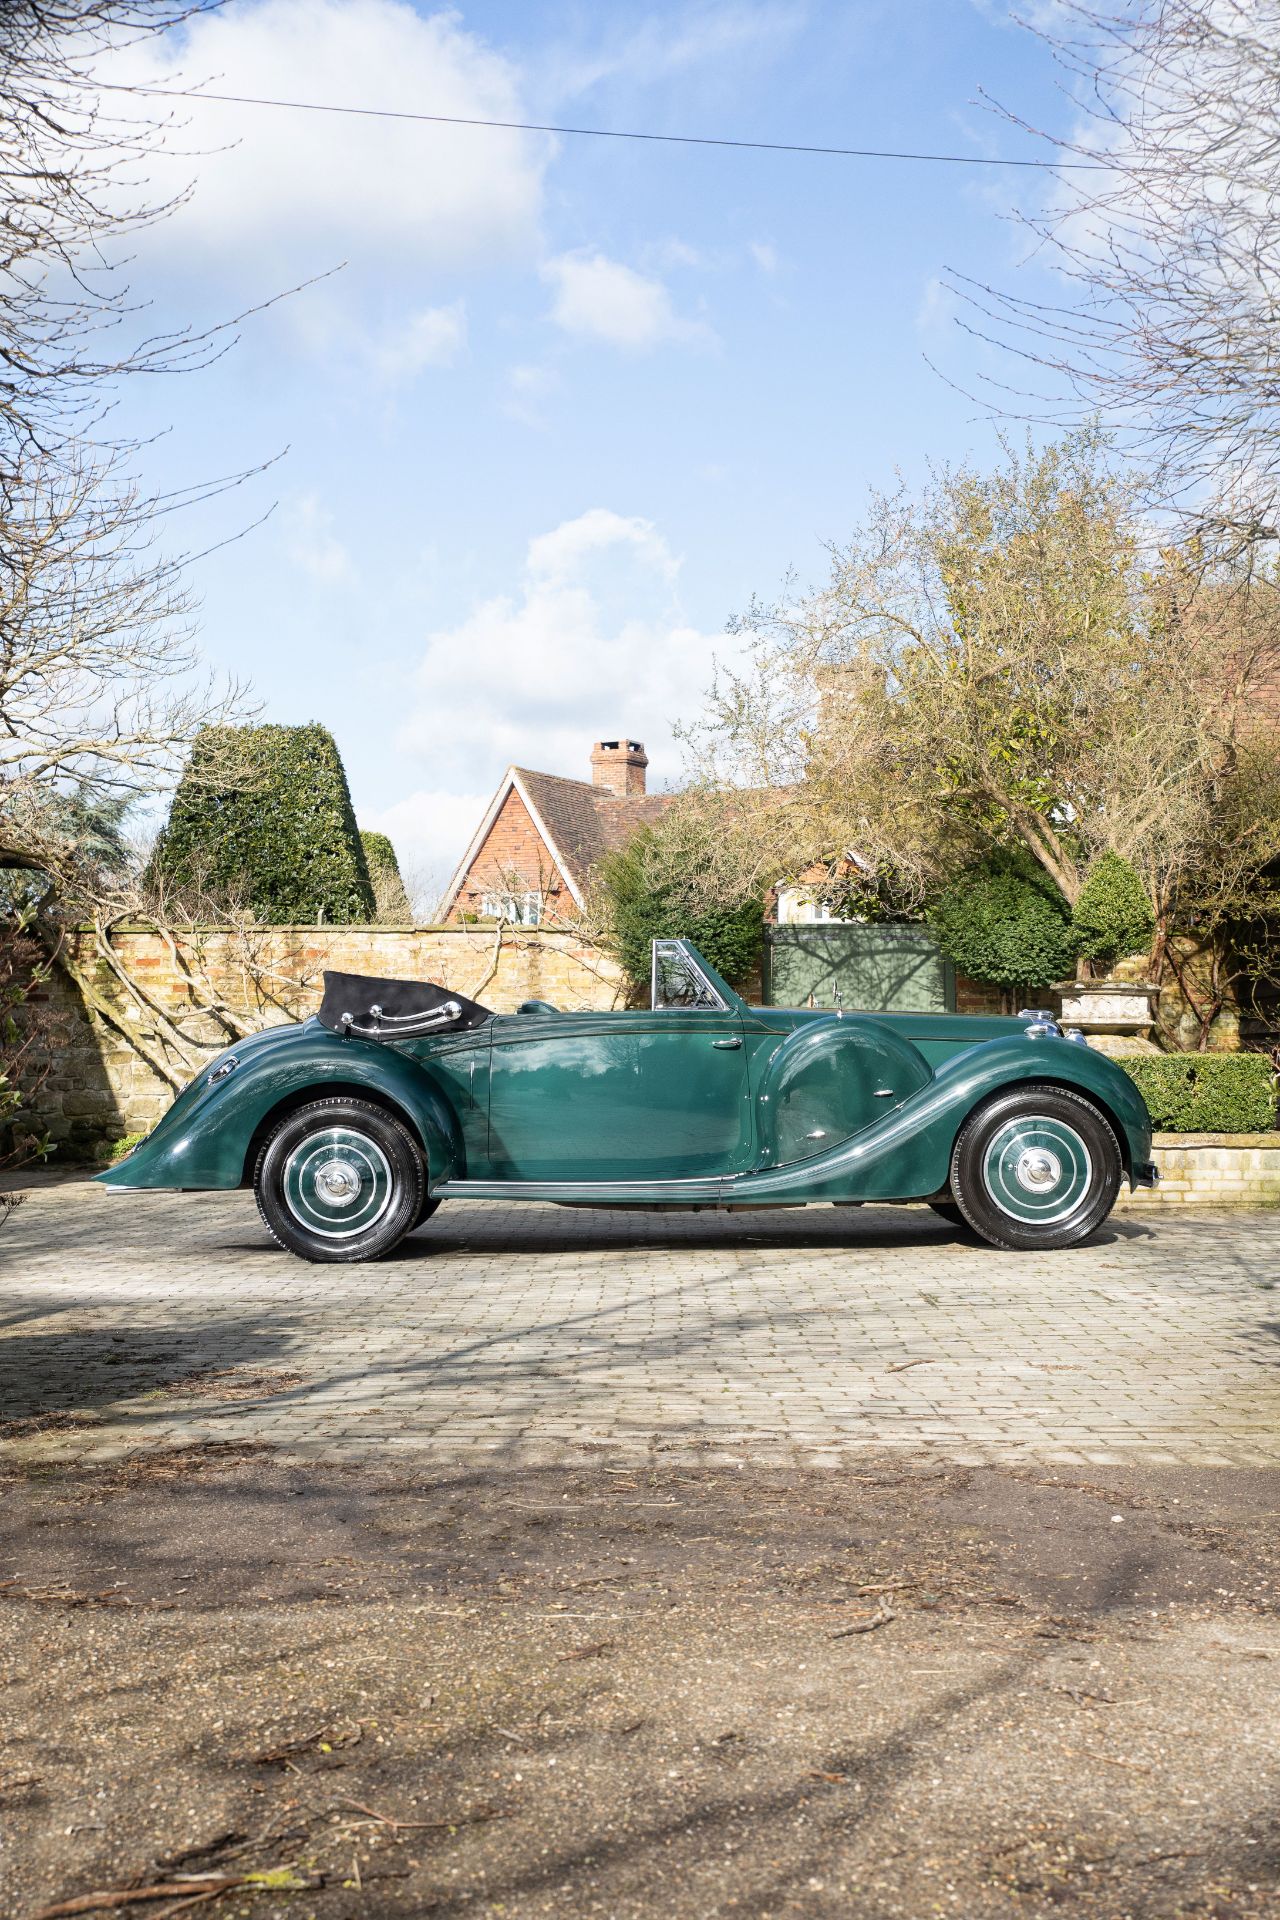 Offered from the estate of the late Michael Patrick Aiken, MBE,1939 Lagonda V12 Drophead Coupé C... - Bild 39 aus 64